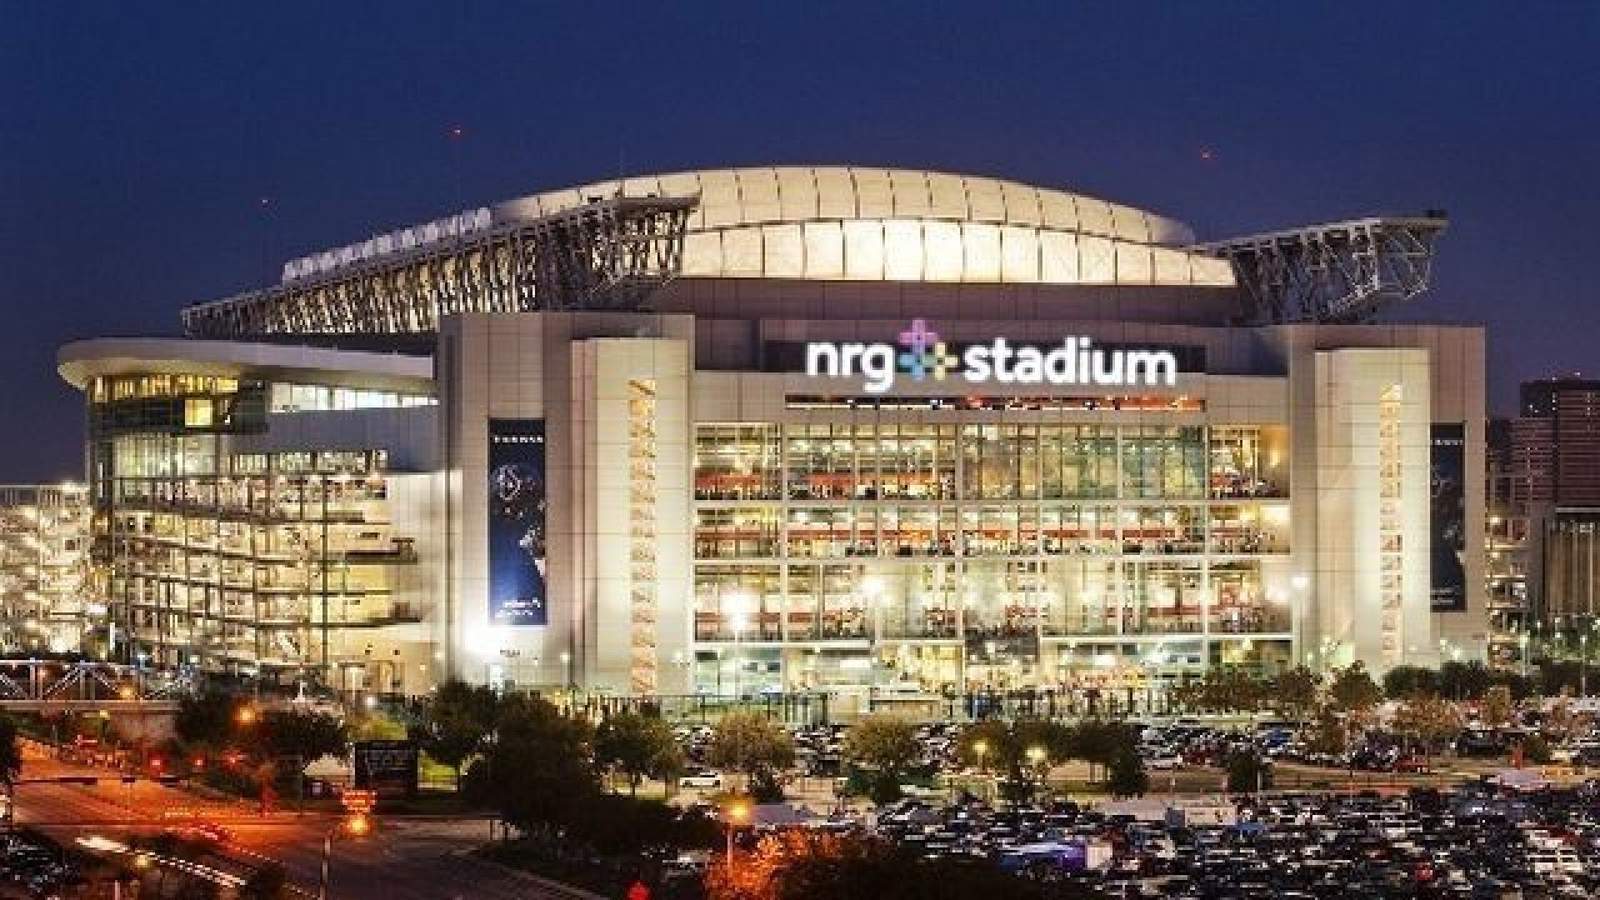 A medical shelter is being built at NRG Park. Here’s what we know about it